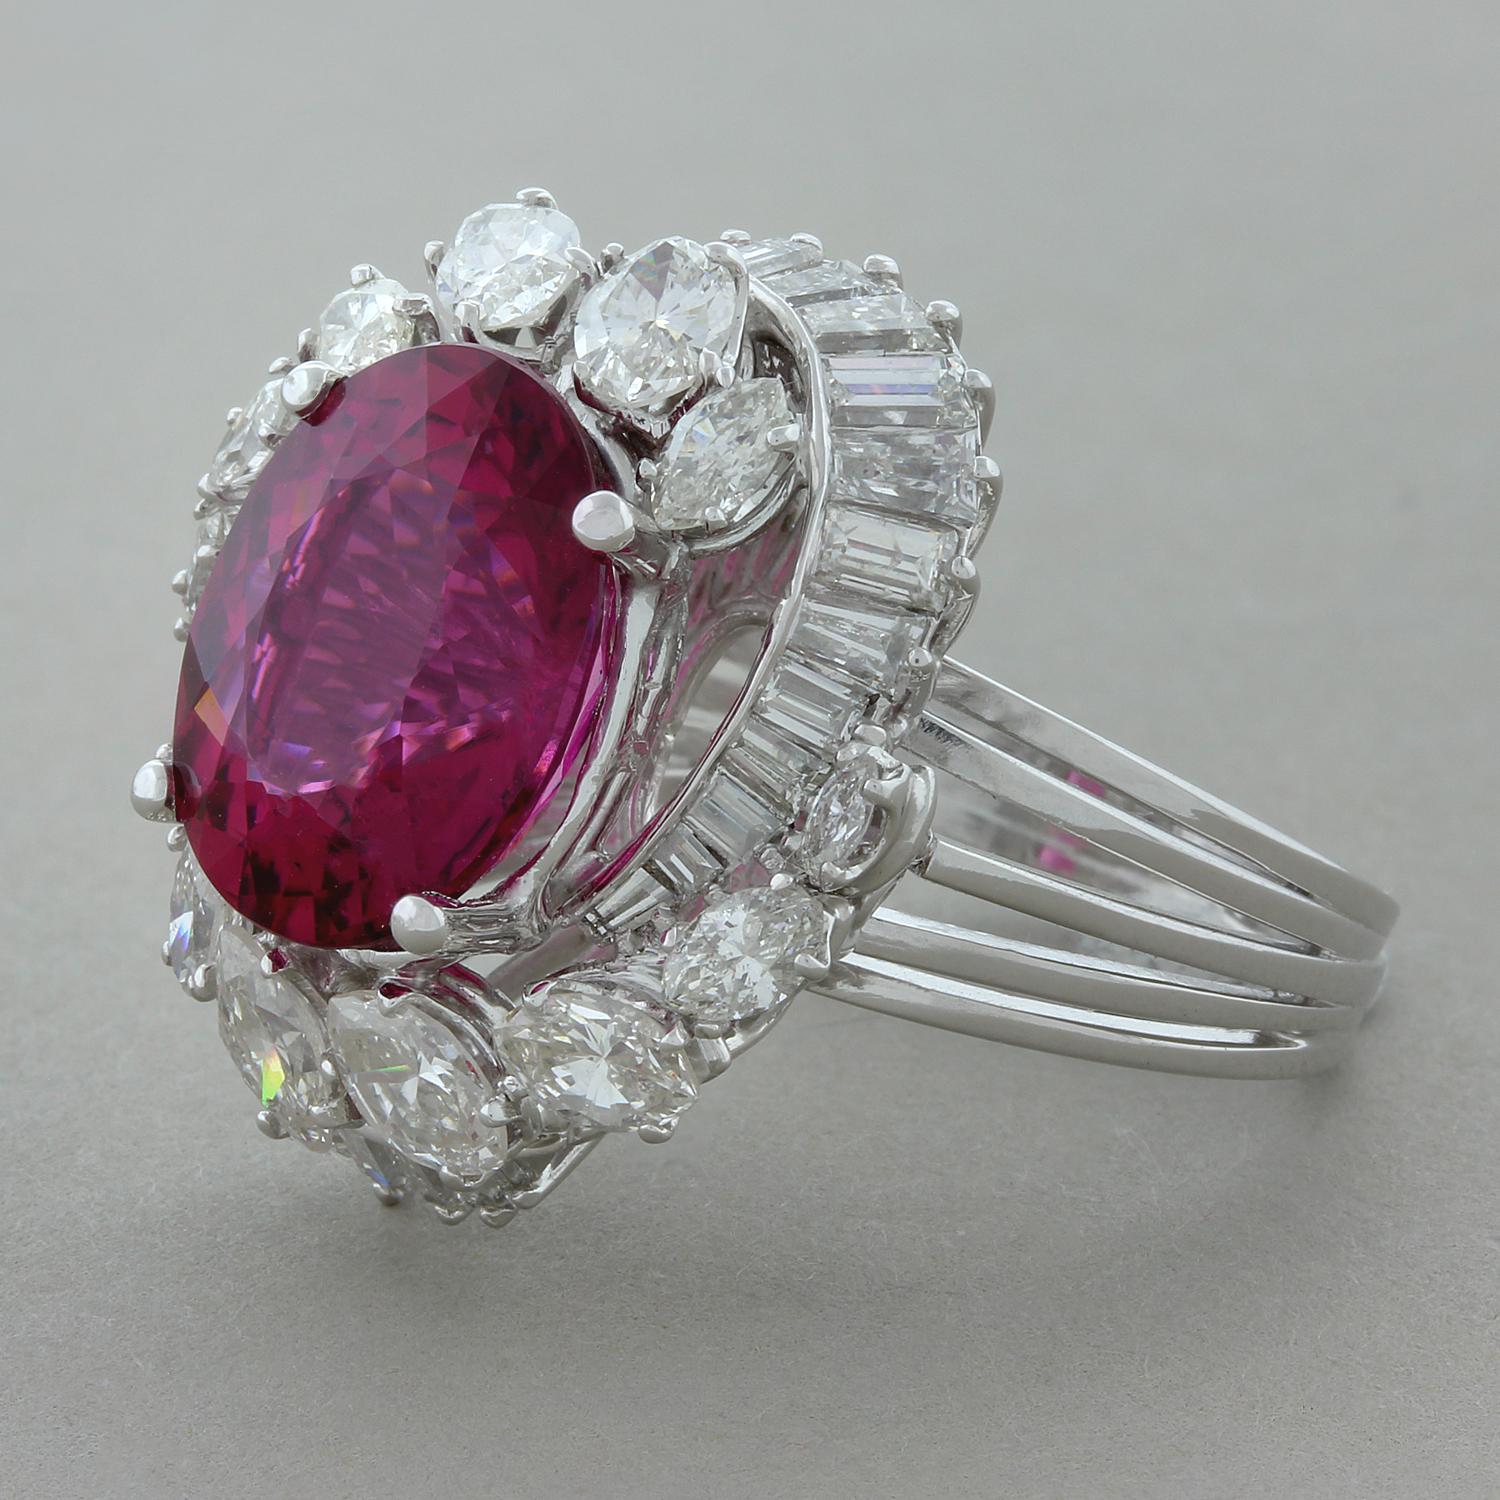 A gorgeous ring from the 1960’s featuring a 6.84 carat oval shaped royal red rubelite tourmaline. The rubelite is surrounded by 3.40 carats of marquise and baguette cut diamonds which spiral around the gemstone in a platinum setting. A classic